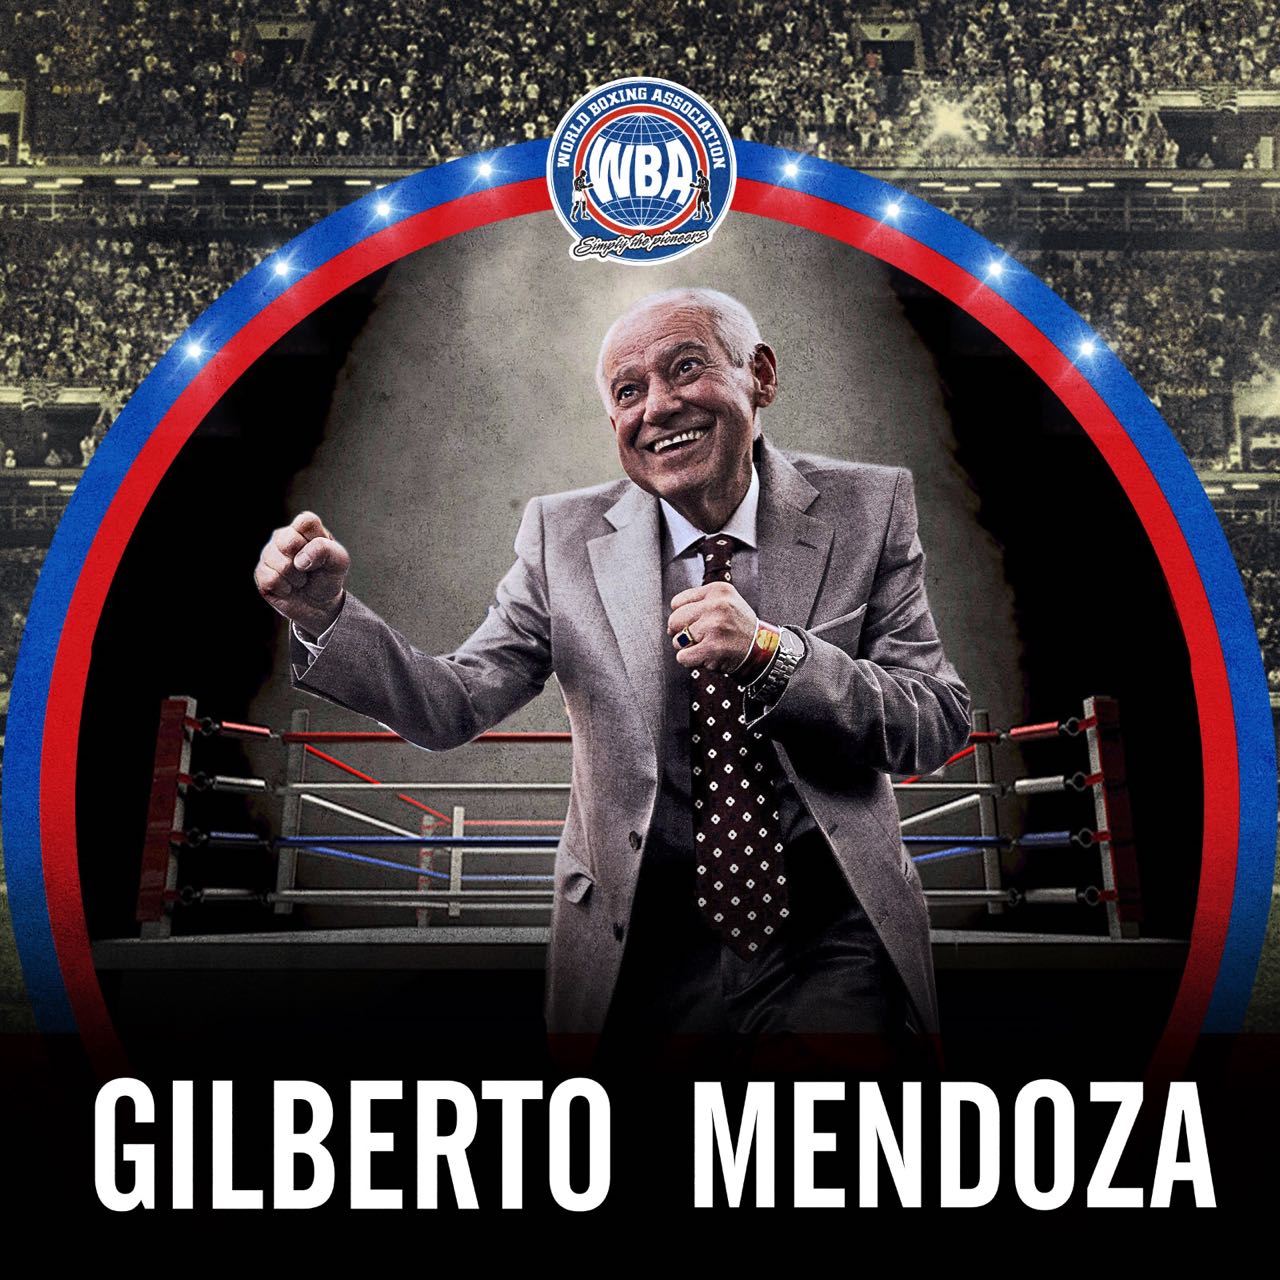 Six days full of boxing formed the First Gilberto Mendoza Festival